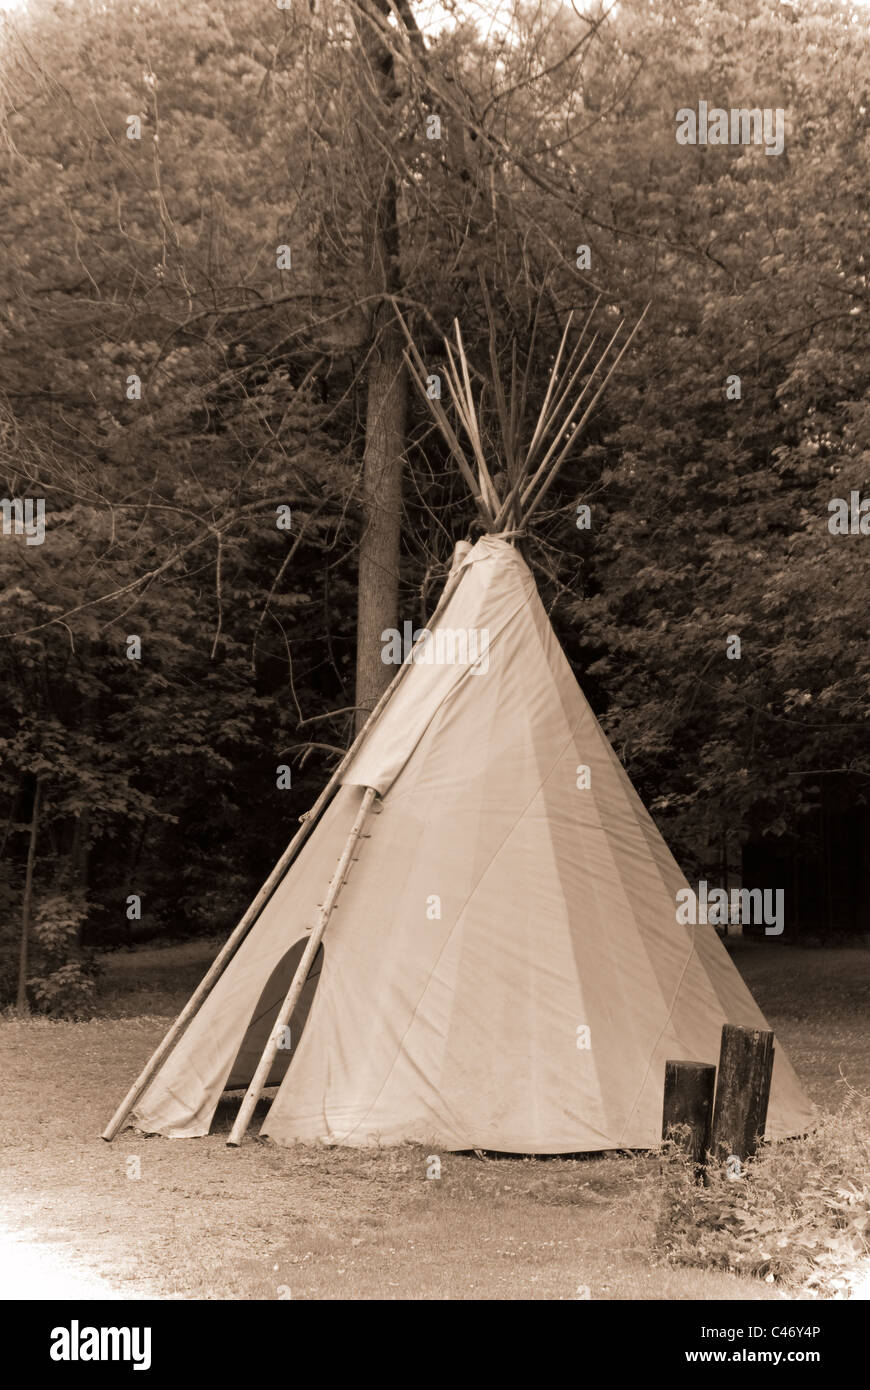 A traditional Indian tipi photographed in a faux antique, faded sepia style simulating an early 20th century photograph. Stock Photo